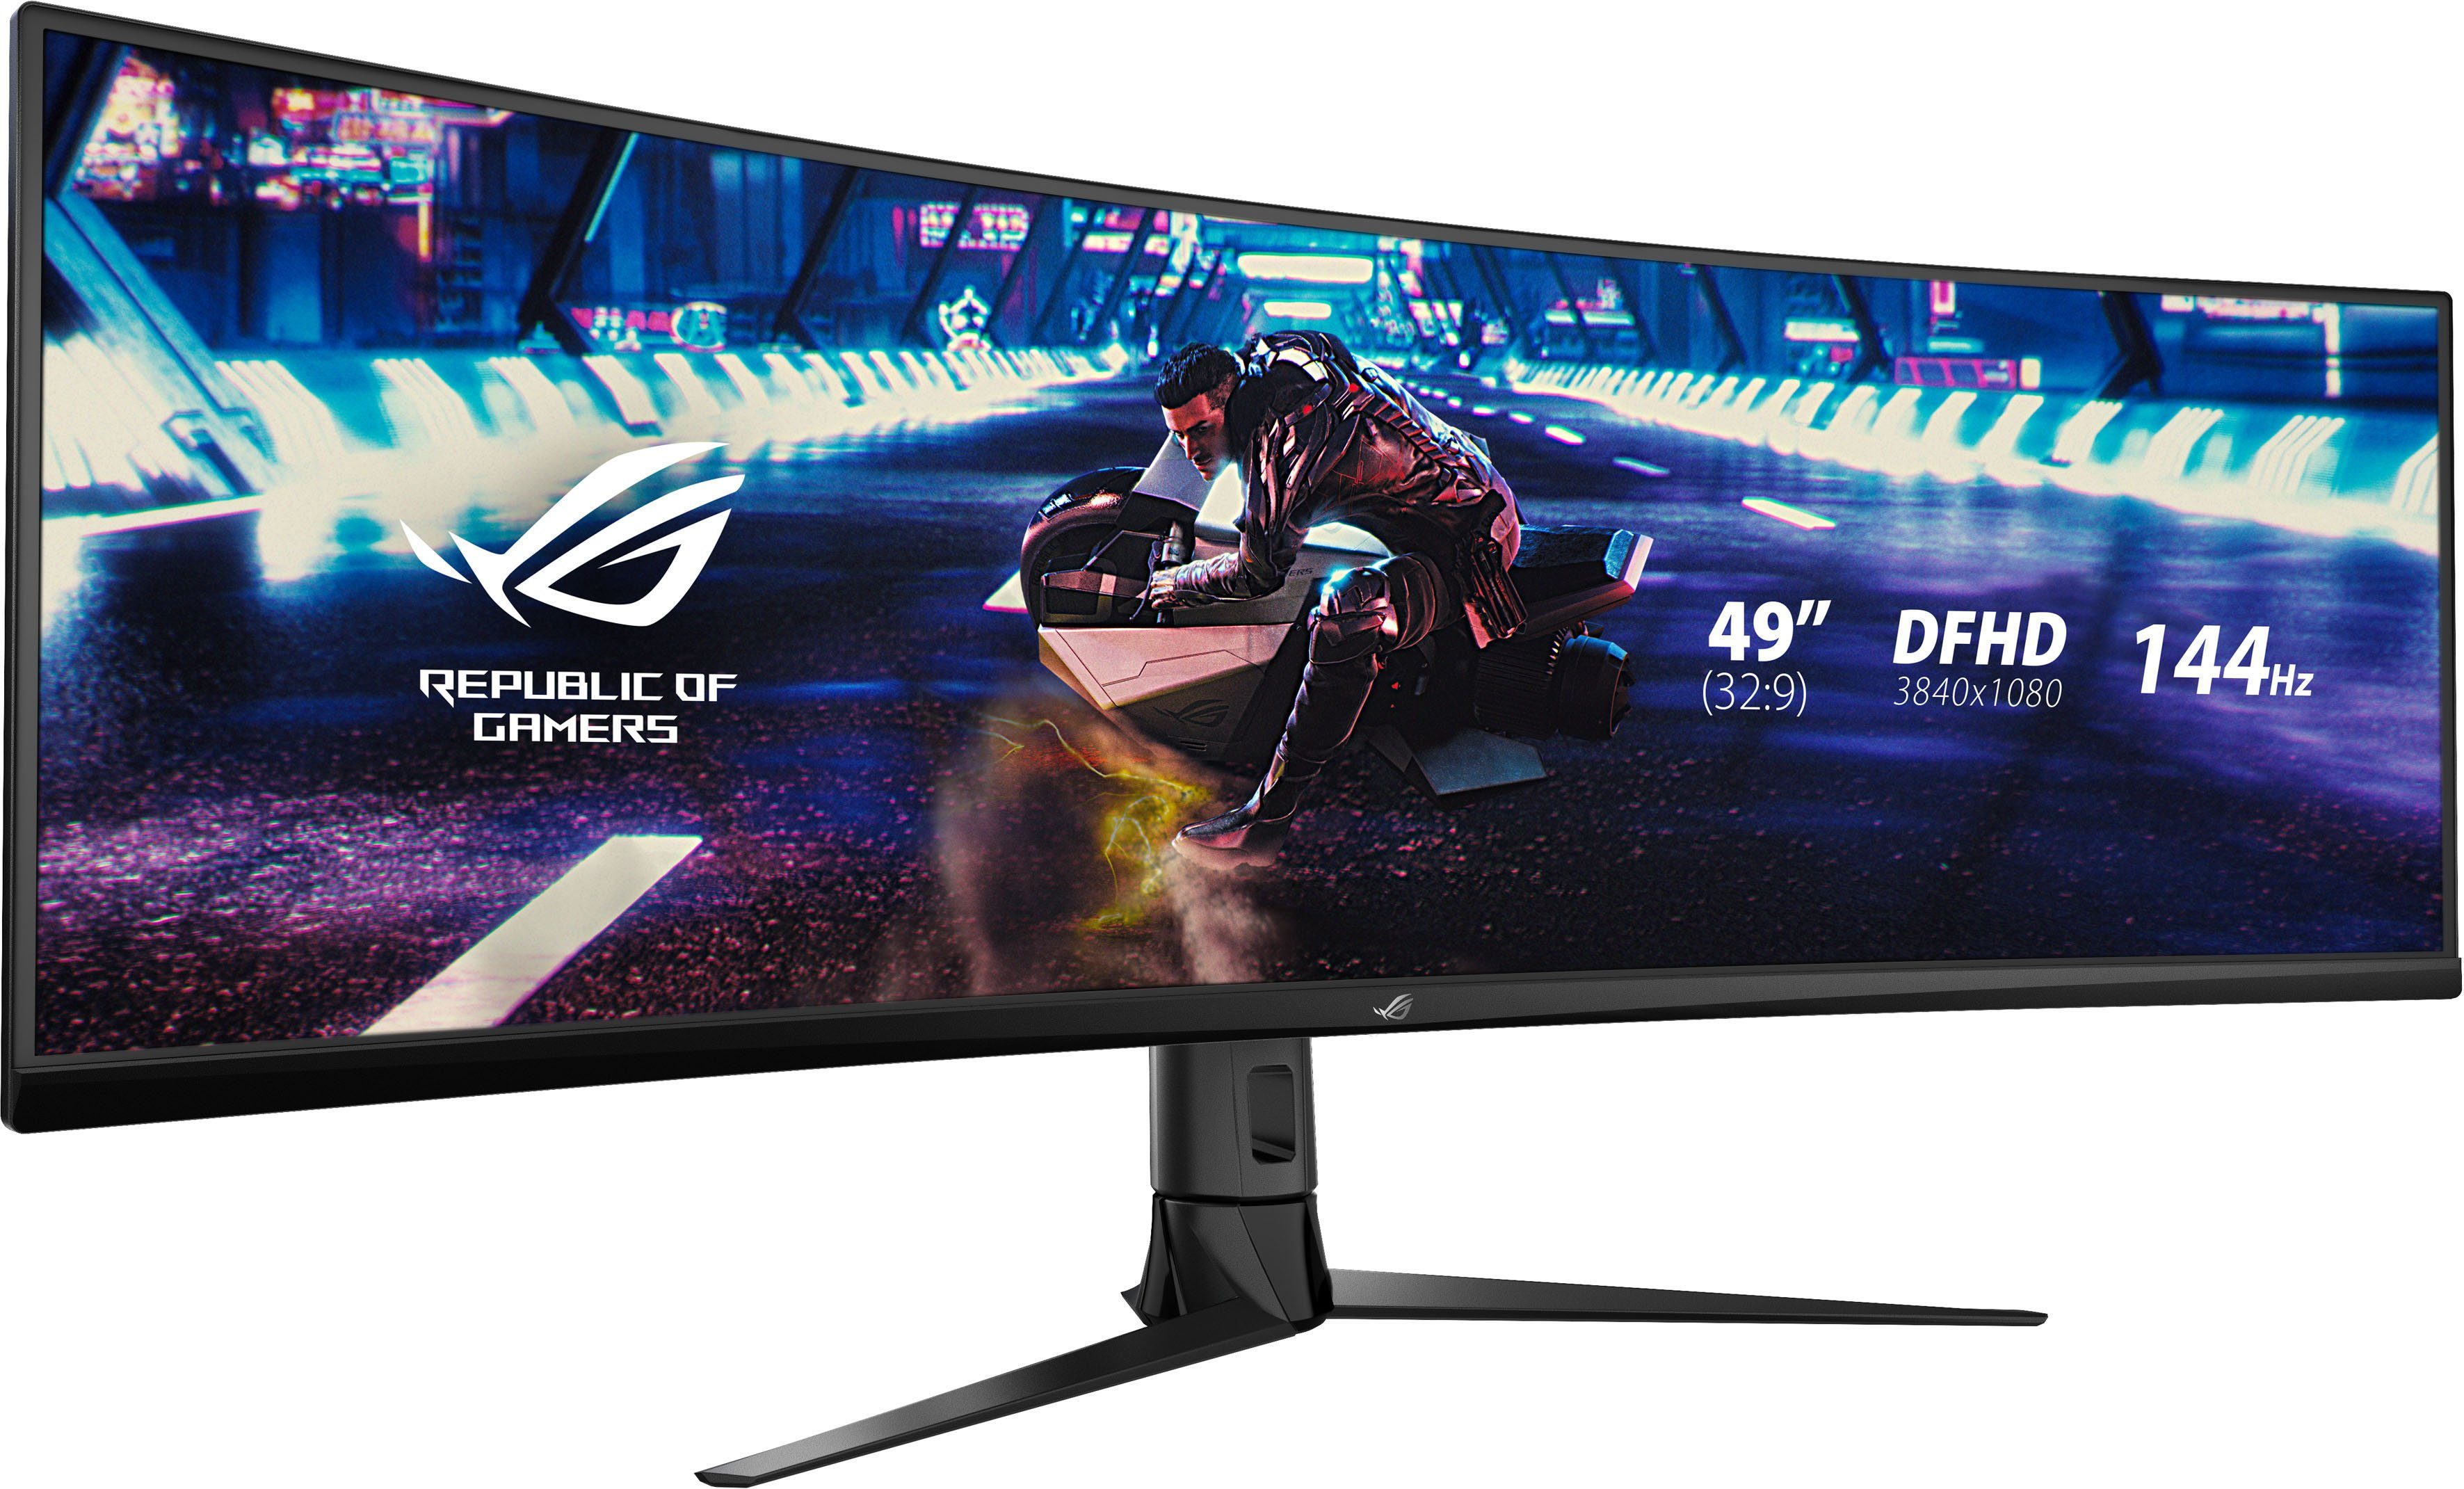 HD, 3840 ms 4 Gaming x Curved-Gaming-Monitor Asus (124,46 144 Reaktionszeit, XG49VQ px, ", LED, 1080 cm/49 Full VA Monitor) Hz,